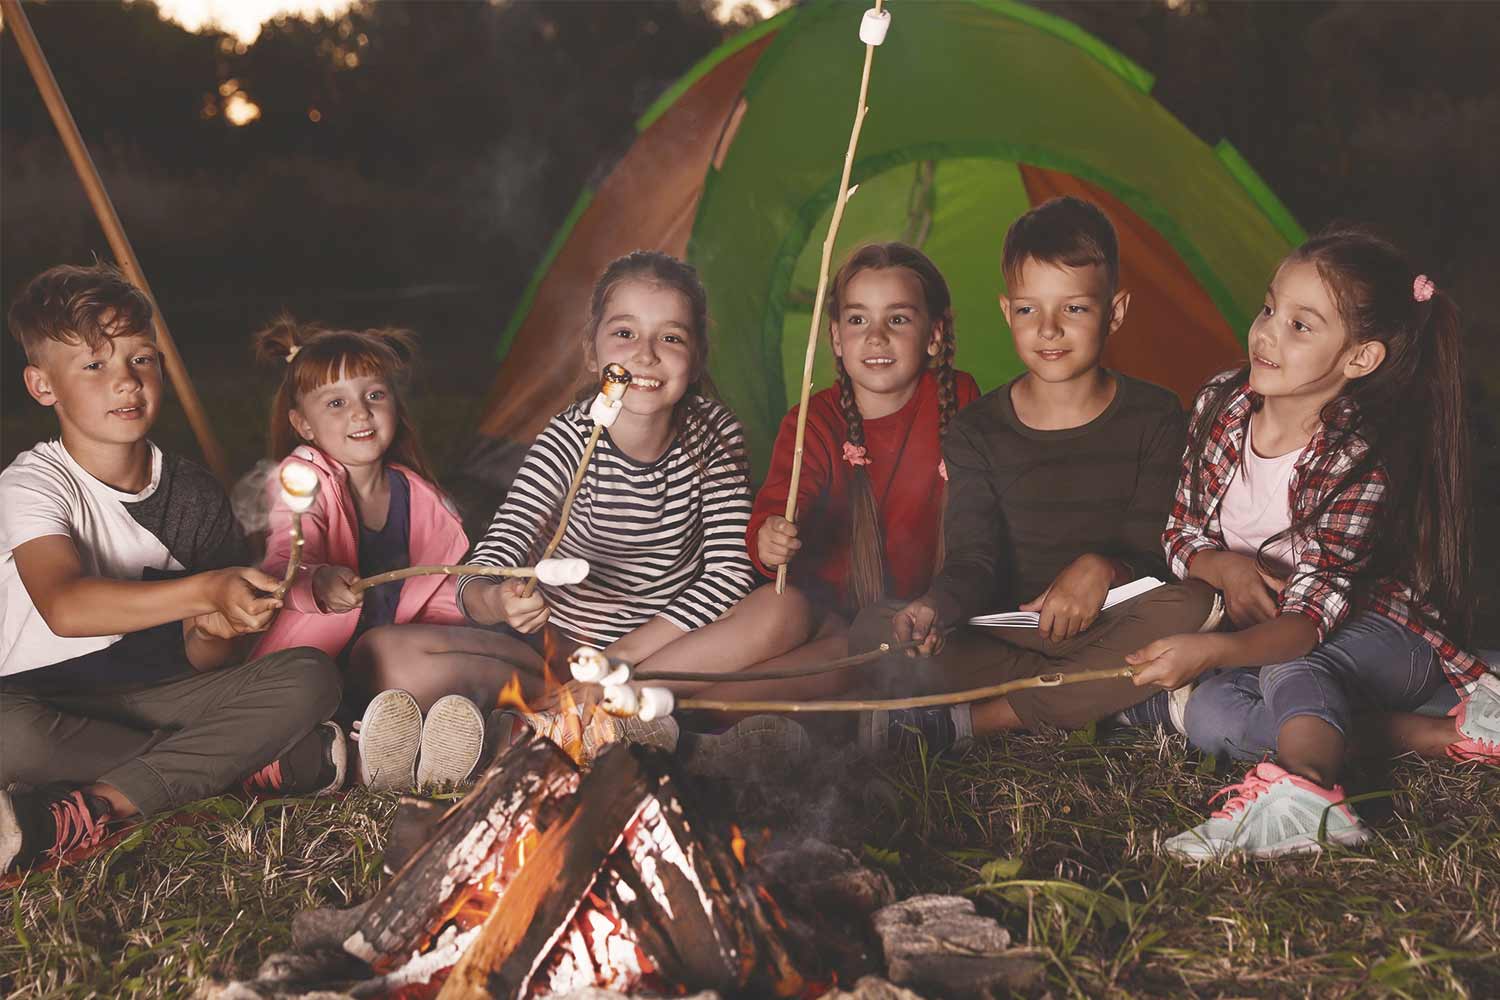 Group of kids camping and roasting marshmallows around a bonfire at night as a summer activity